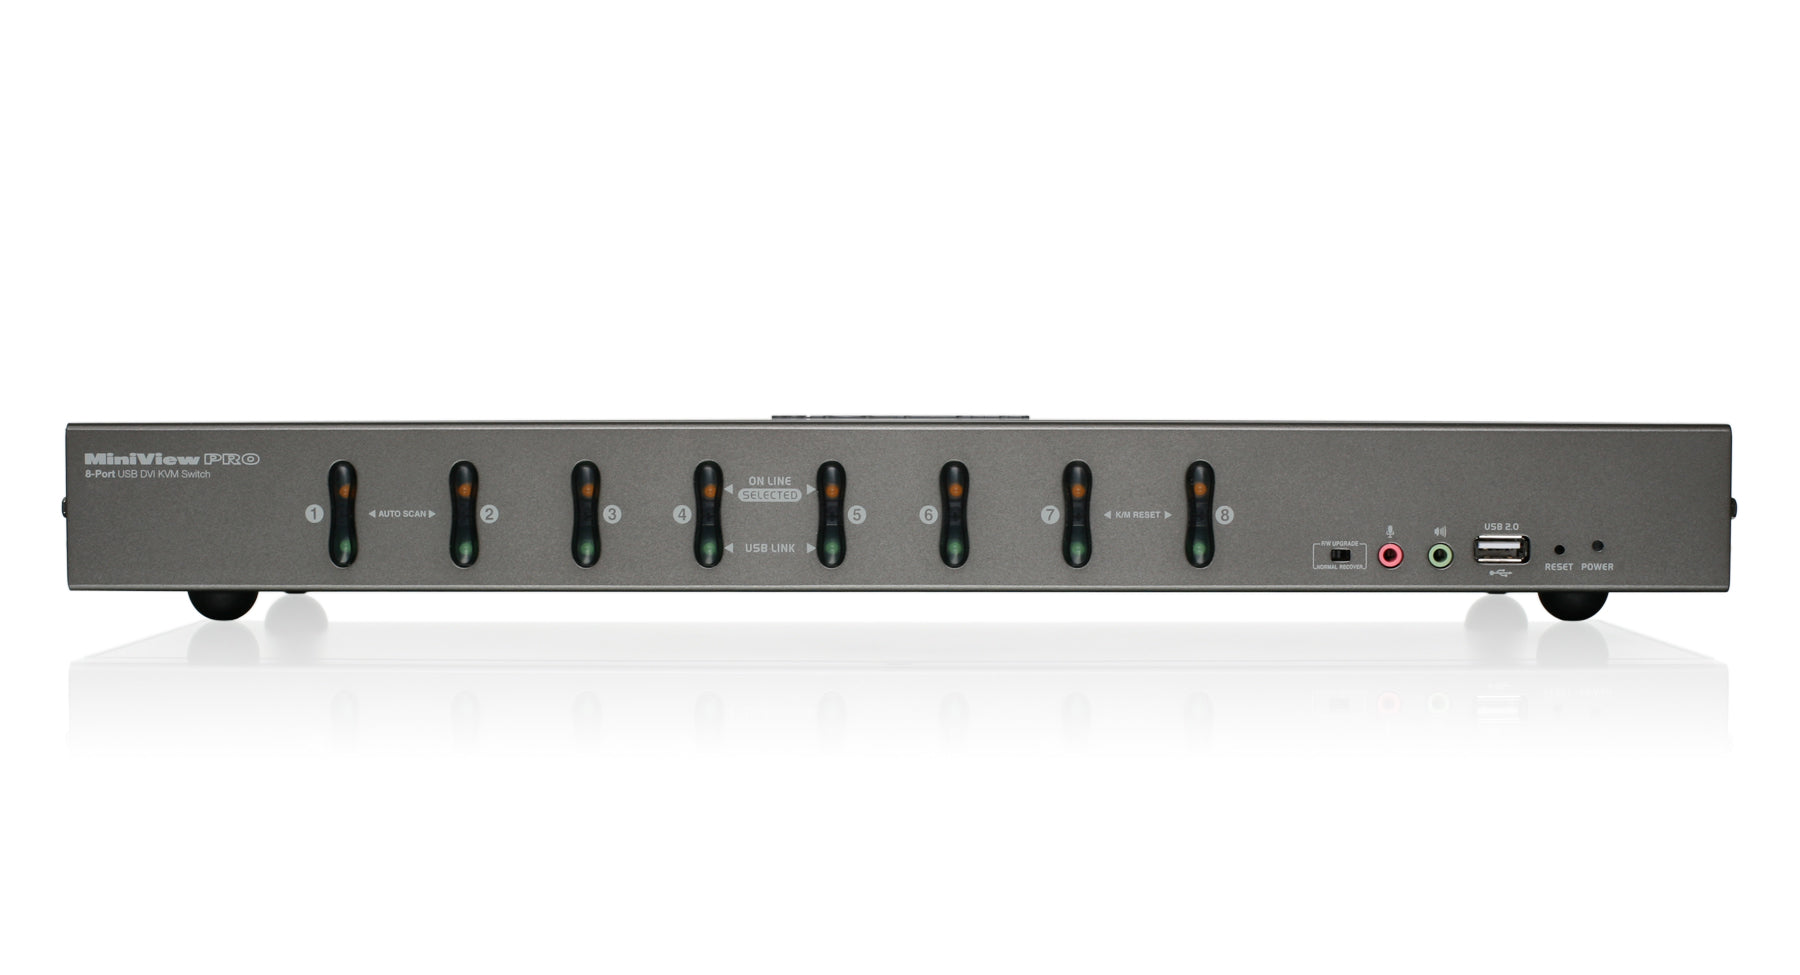 8-Port DVI KVMP Switch with VGA Support and USB KVM Cables